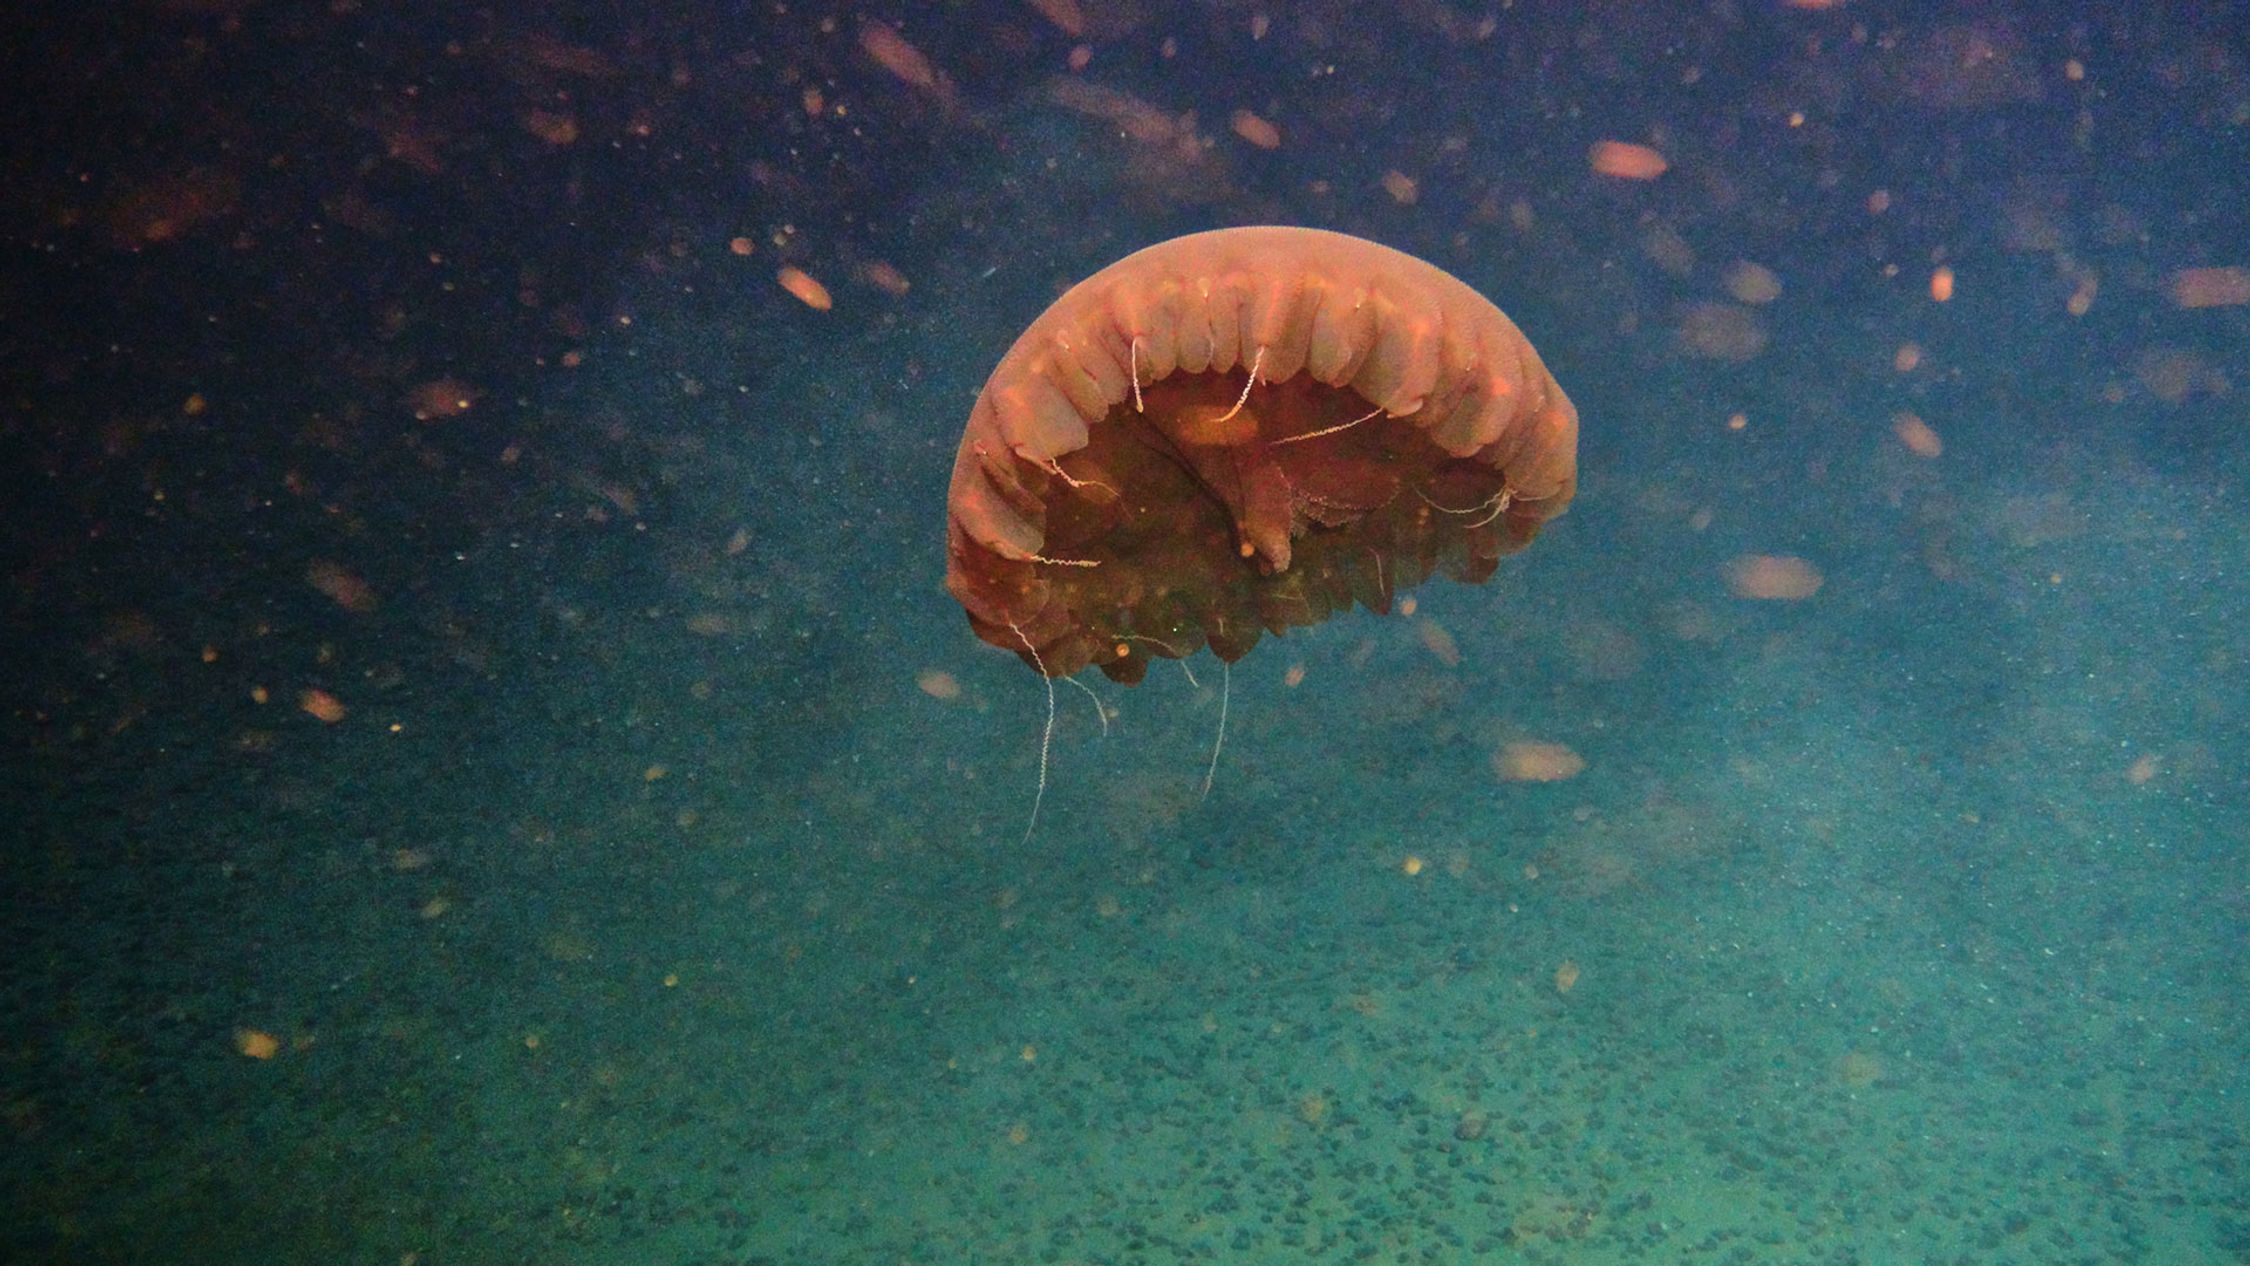 A jellyfish is floating in the water, its dome-shaped bell and trailing tentacles visible. The water around it is speckled with numerous small particles, suggesting plankton or organic debris. The jellyfish is a reddish-brown color, providing a contrast against the deep blue of the ocean. The scene captures the serene, yet alien beauty of marine life in its natural habitat.